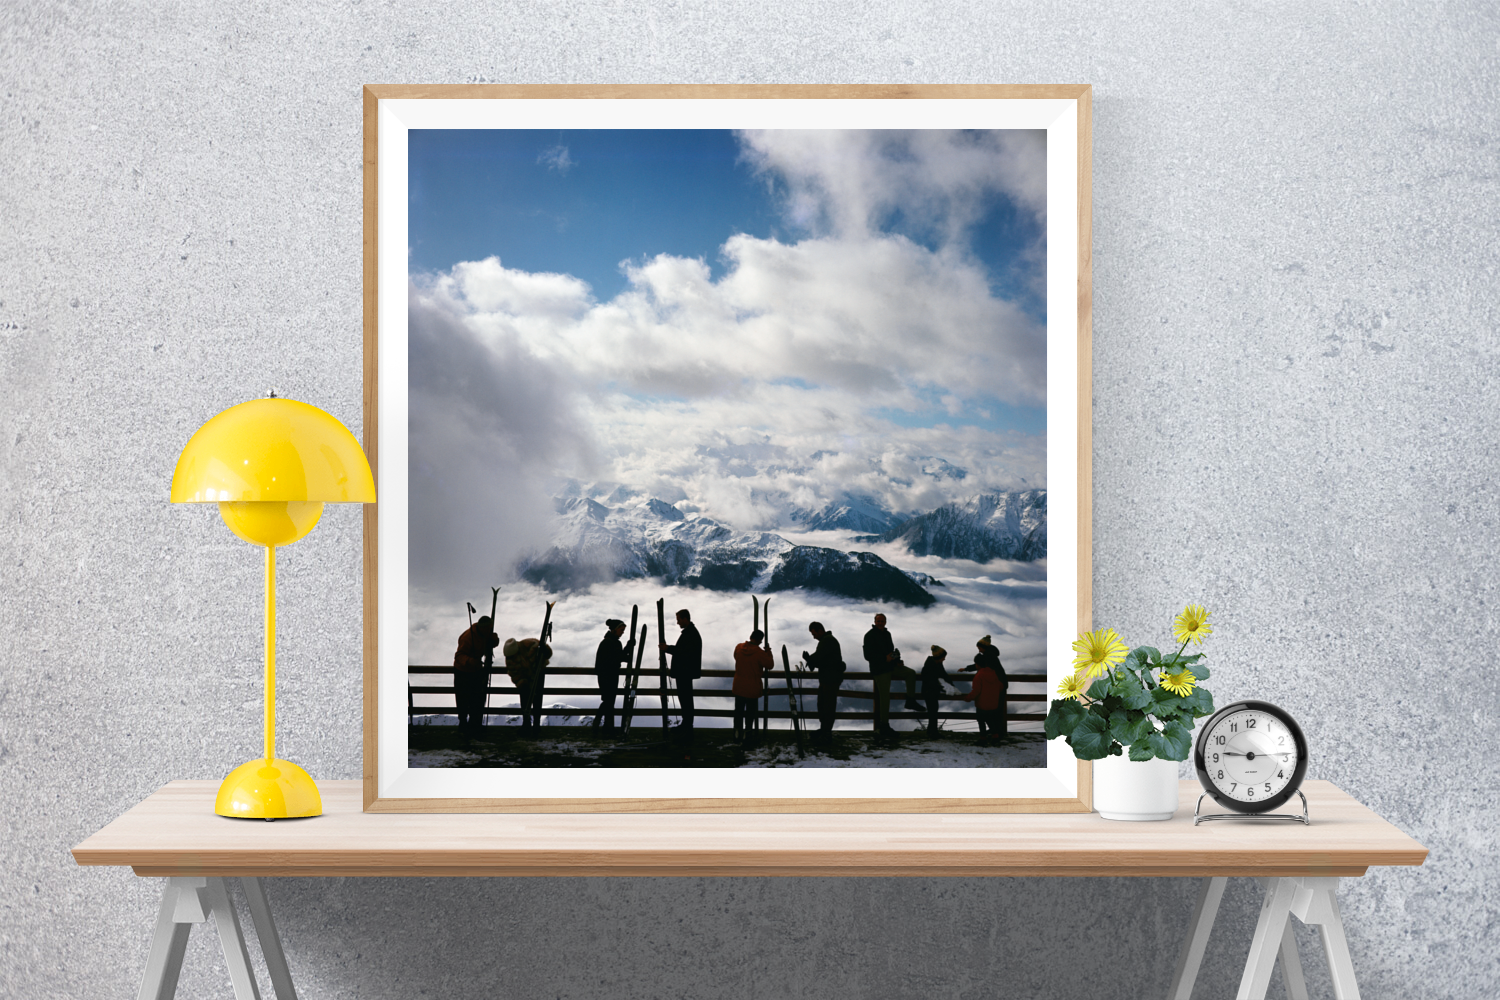 Framed Slim Aarons: Verbier View photo for sale Getty Images Gallery